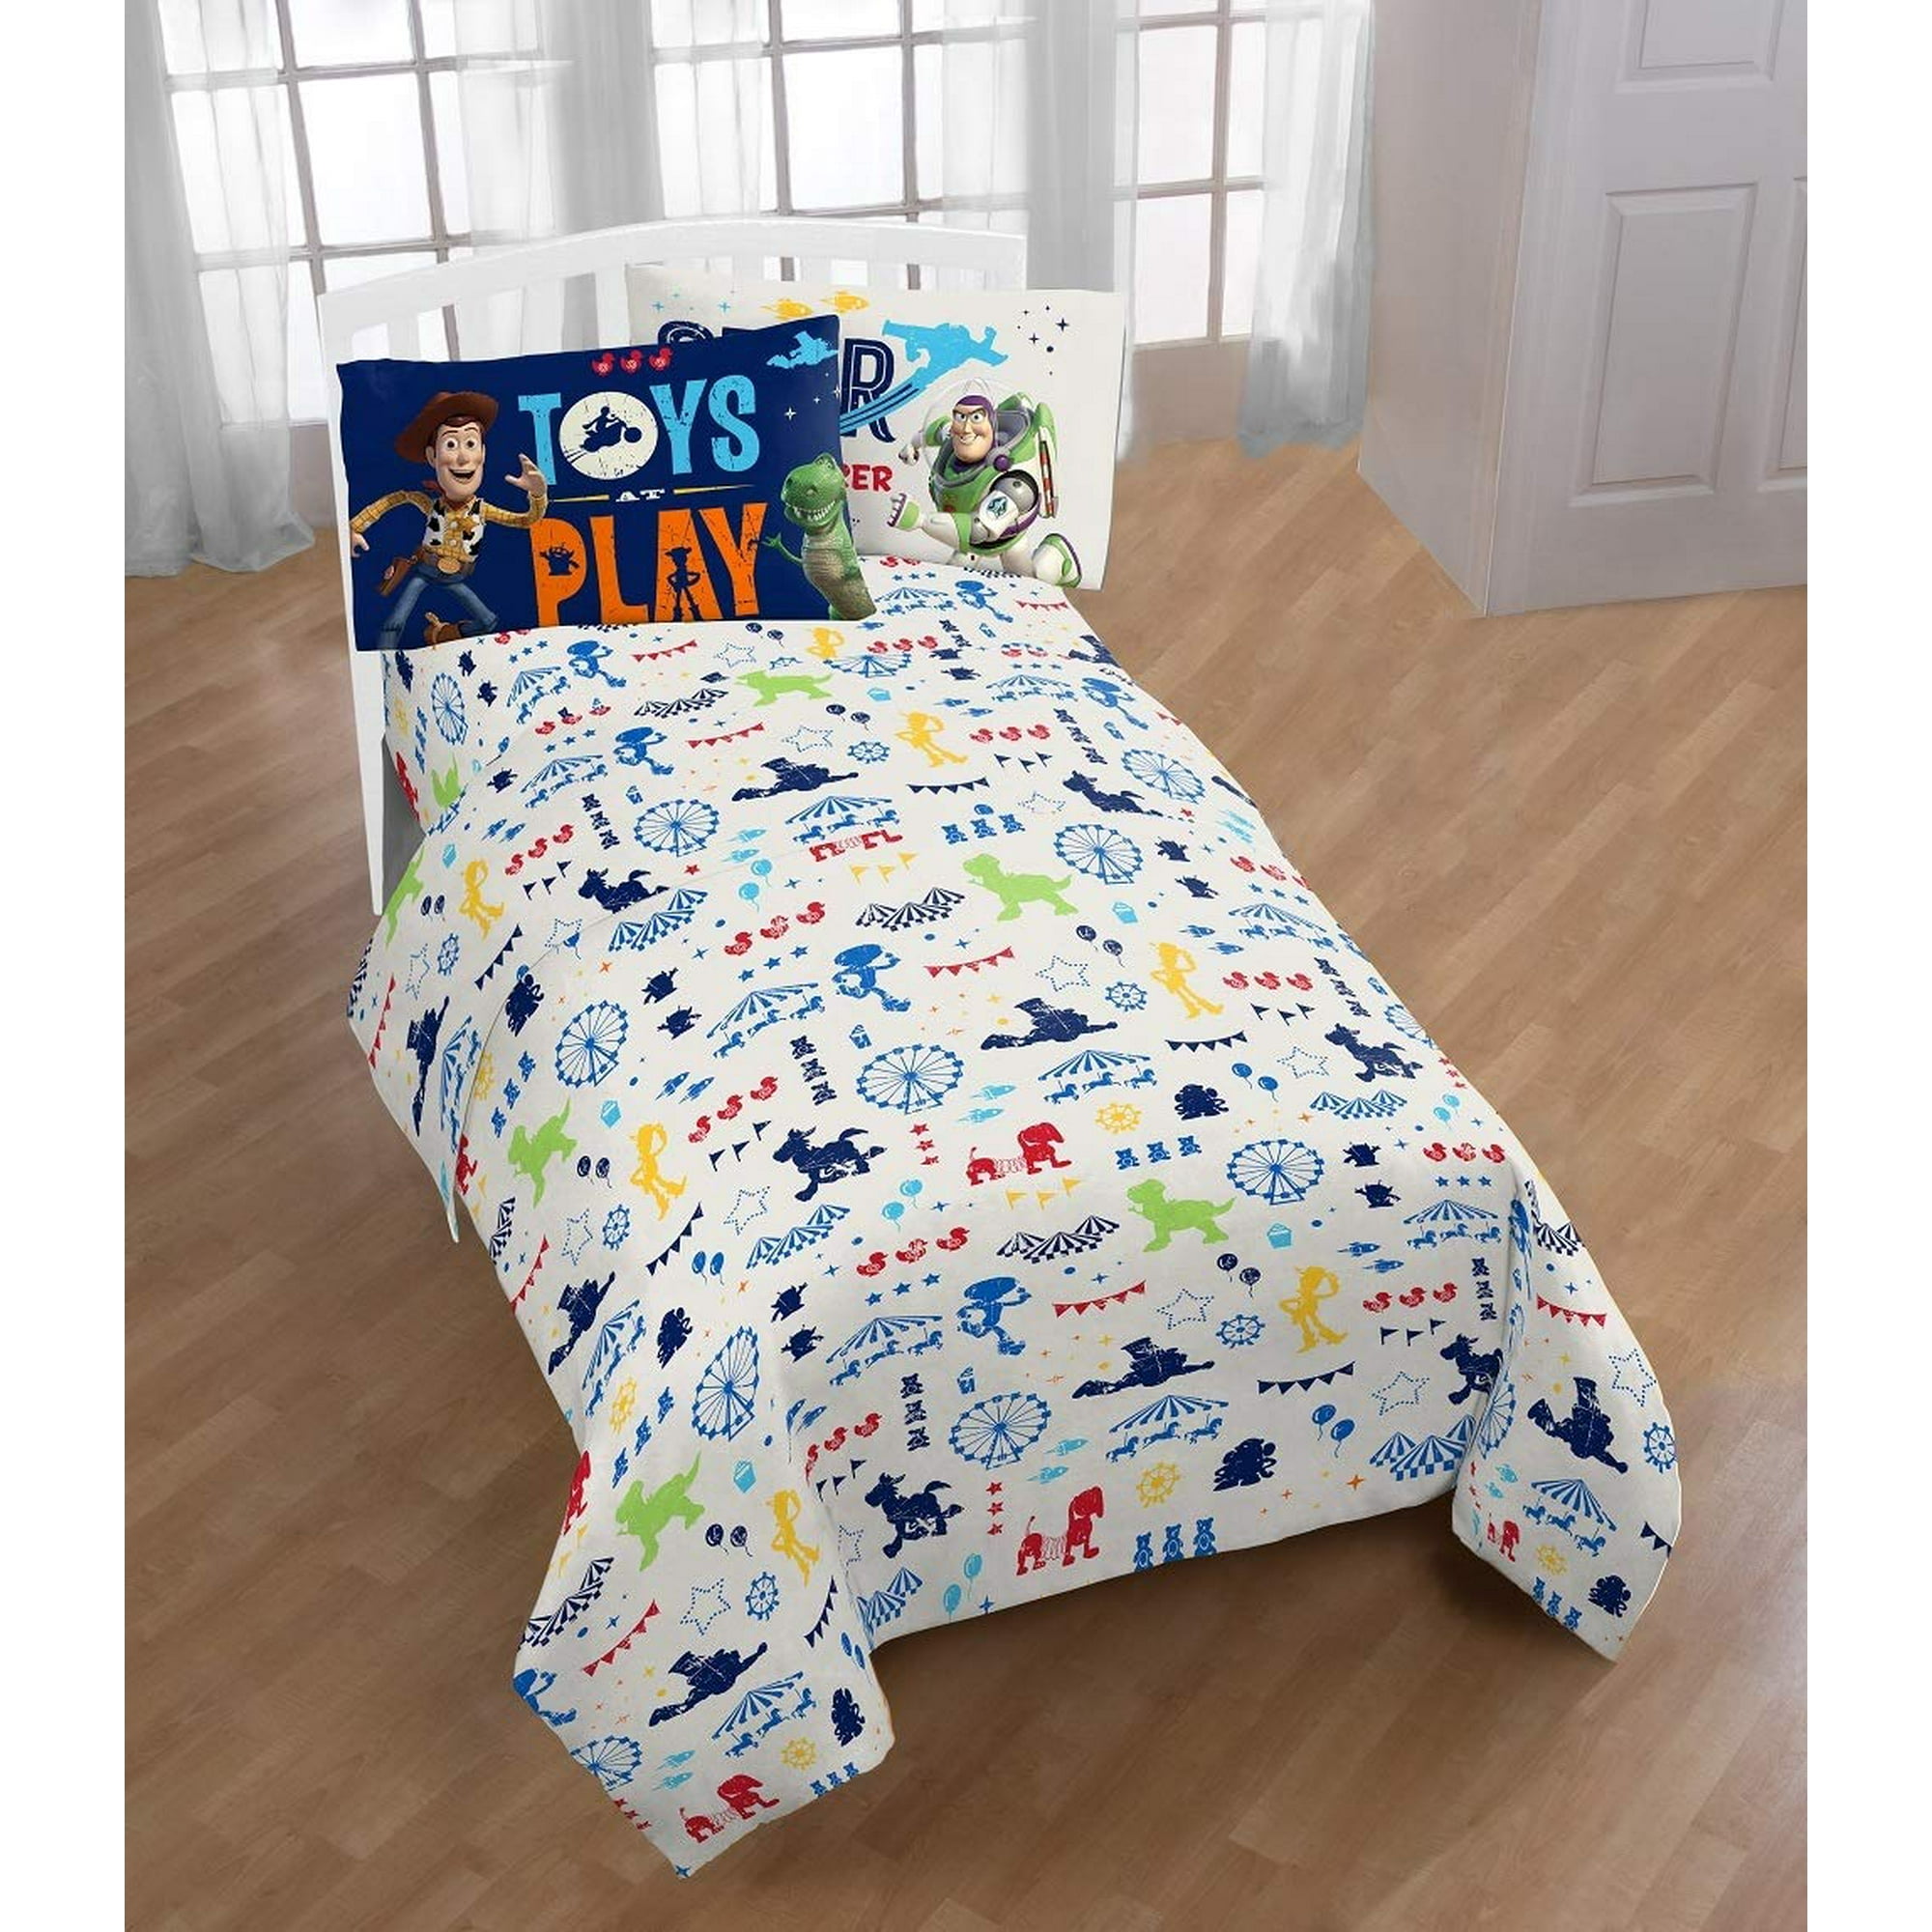 Toy Story 4 Full Reversible Comforter And Sham Set With 4 Piece